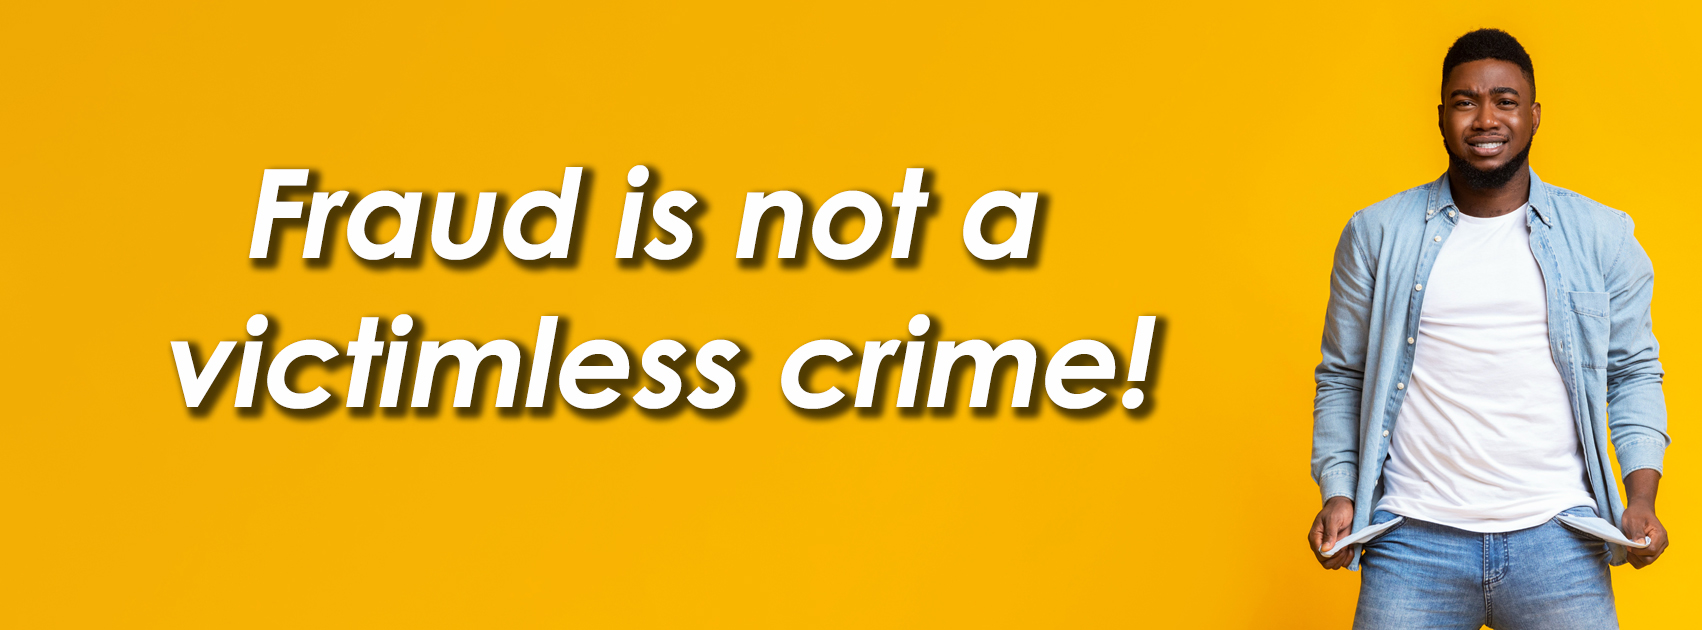 Fraud is not a victimless crime